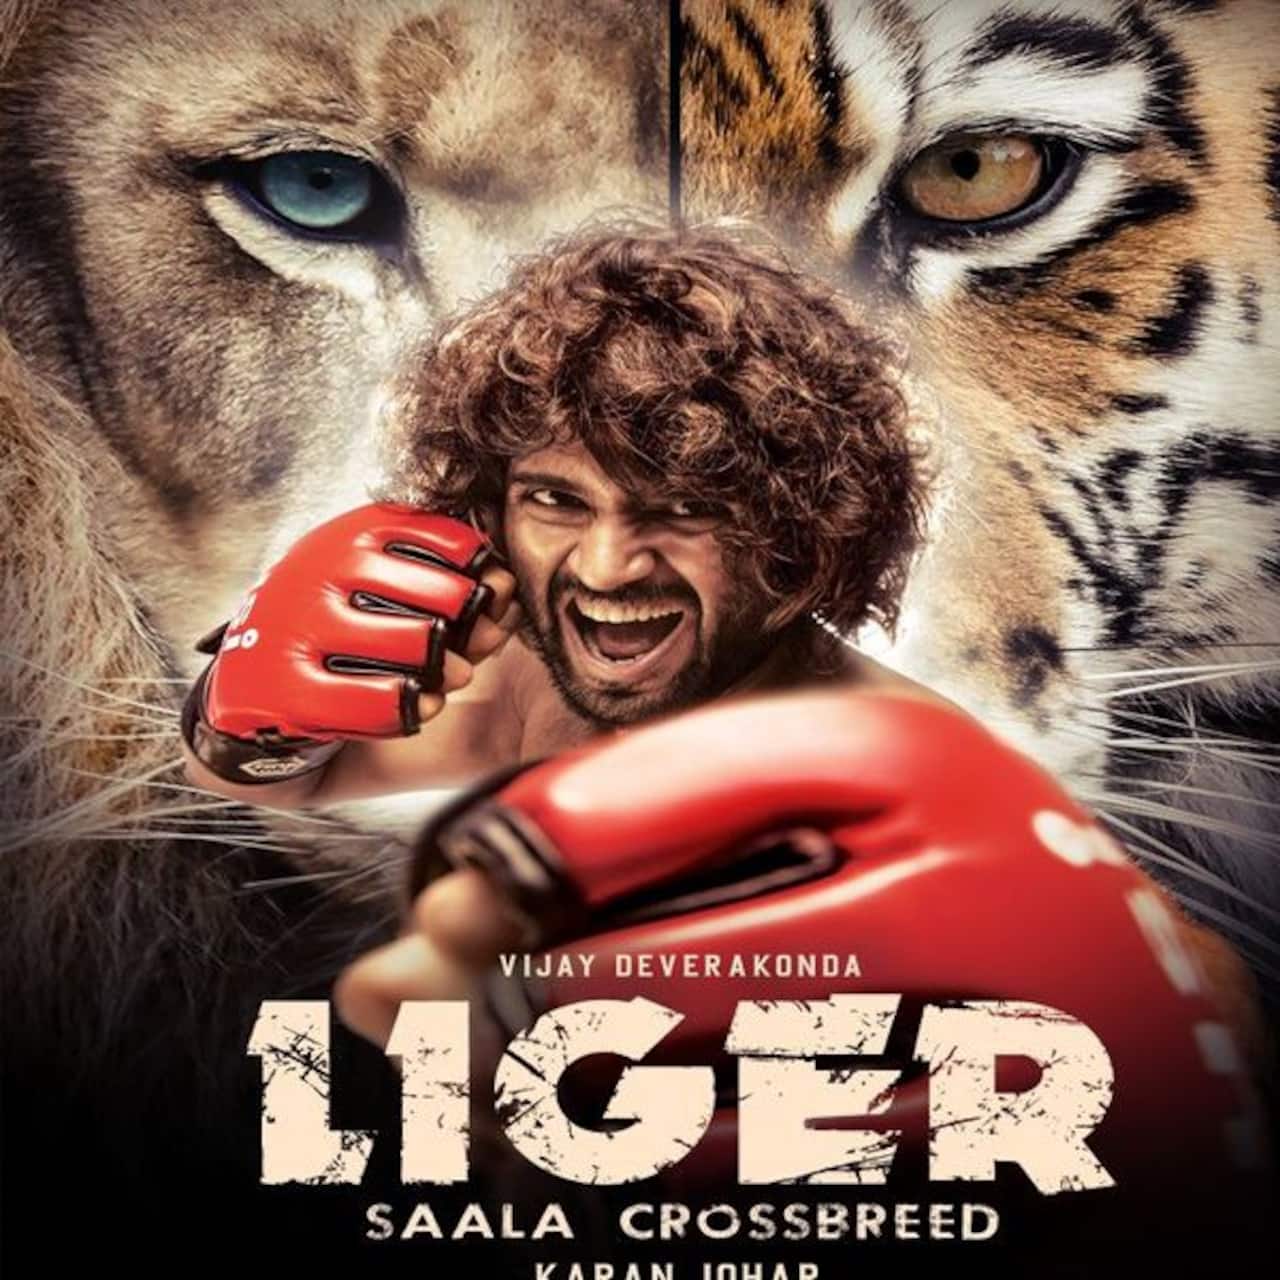 Was Vijay Deverakonda's Bollywood debut with Liger a planned moved ...